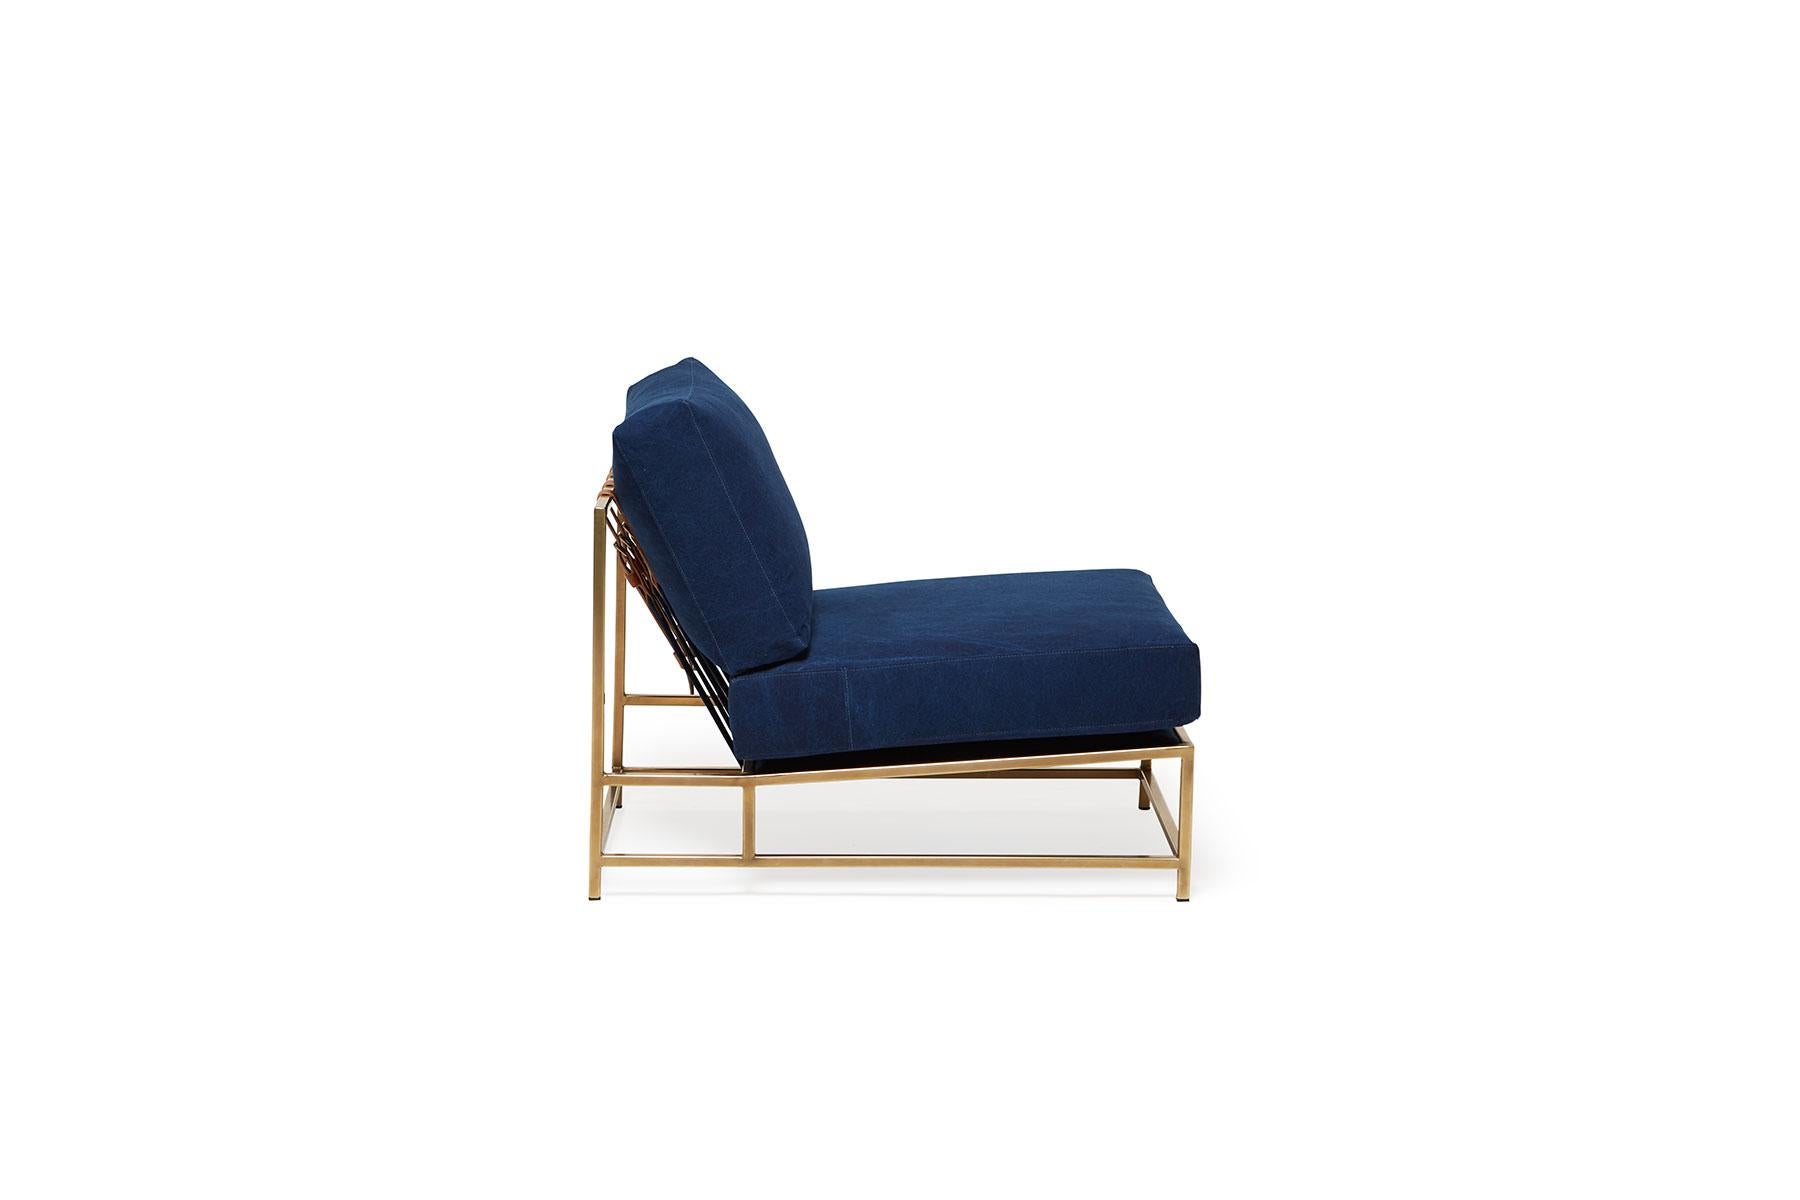 Modern Hand-Dyed Indigo Canvas & Tarnished Brass Chair For Sale